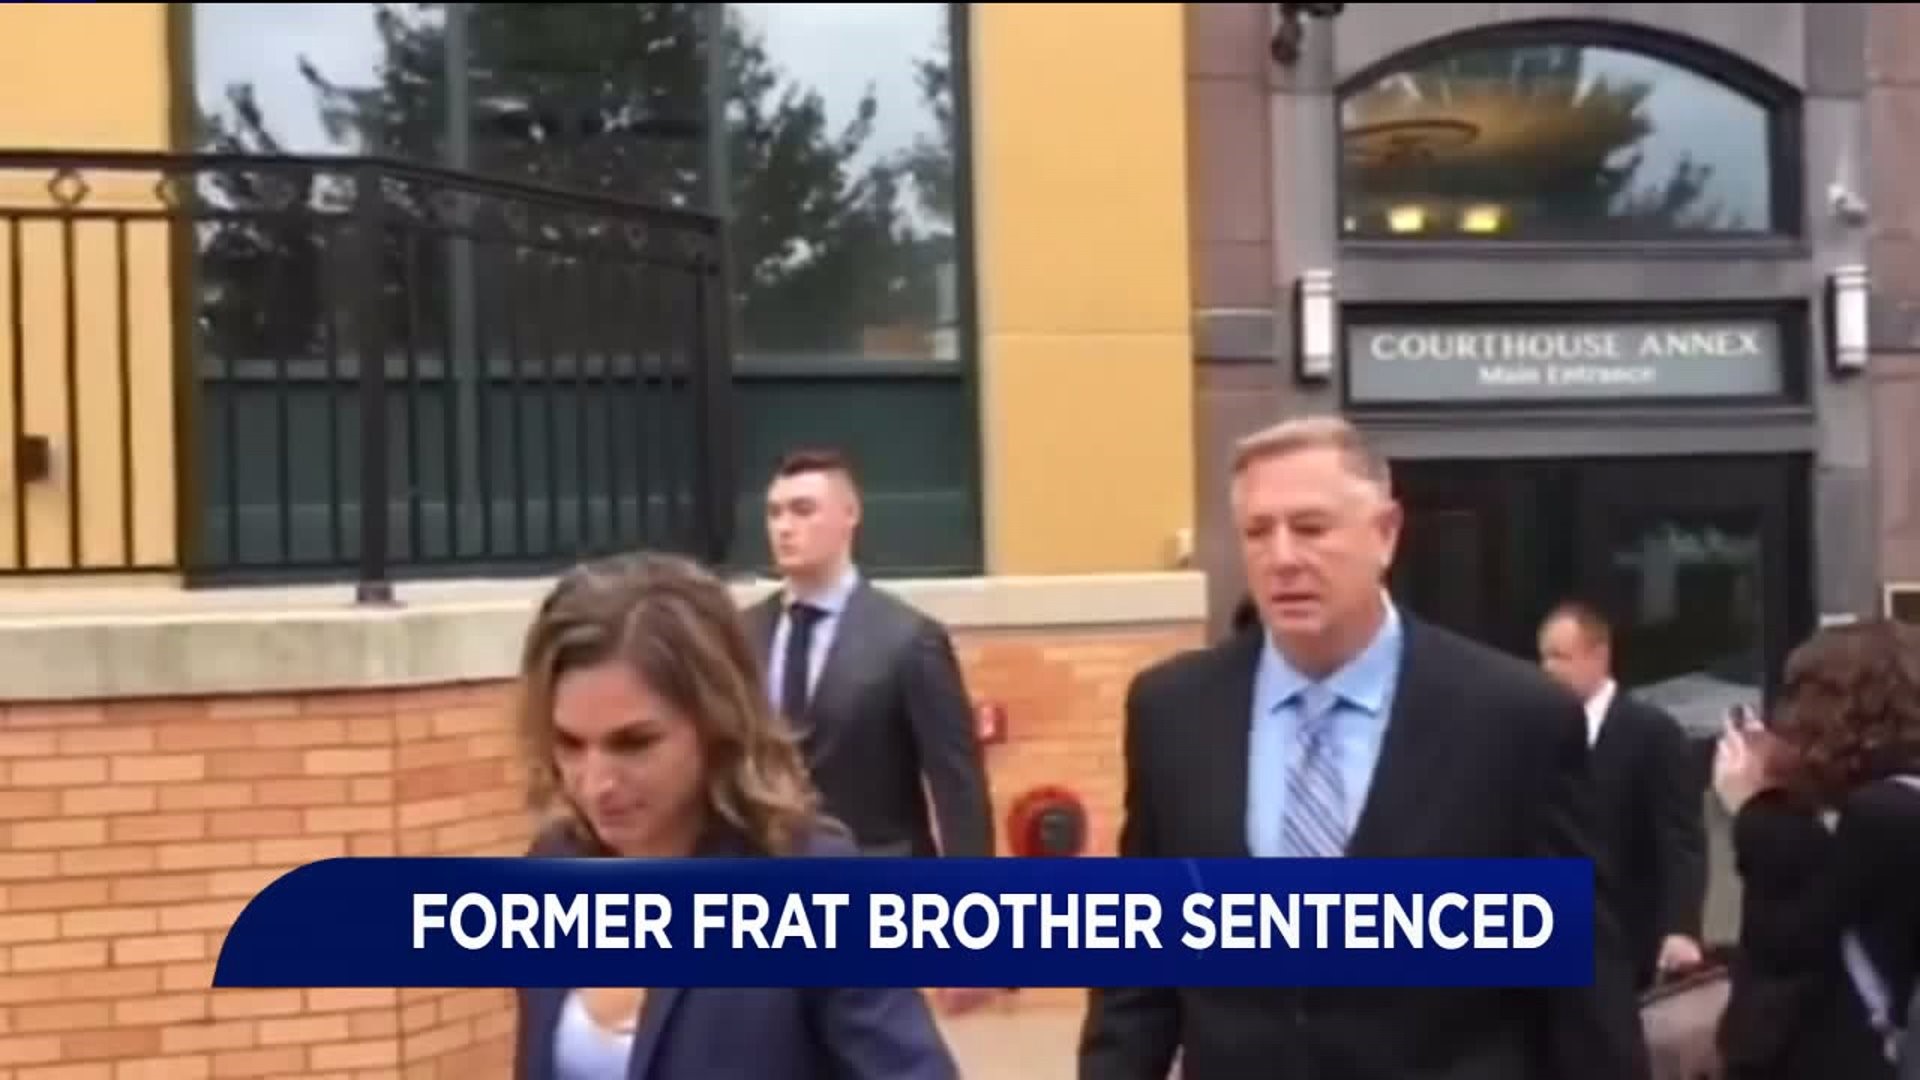 Second Frat Brother Sentenced in Fraternity Hazing Death